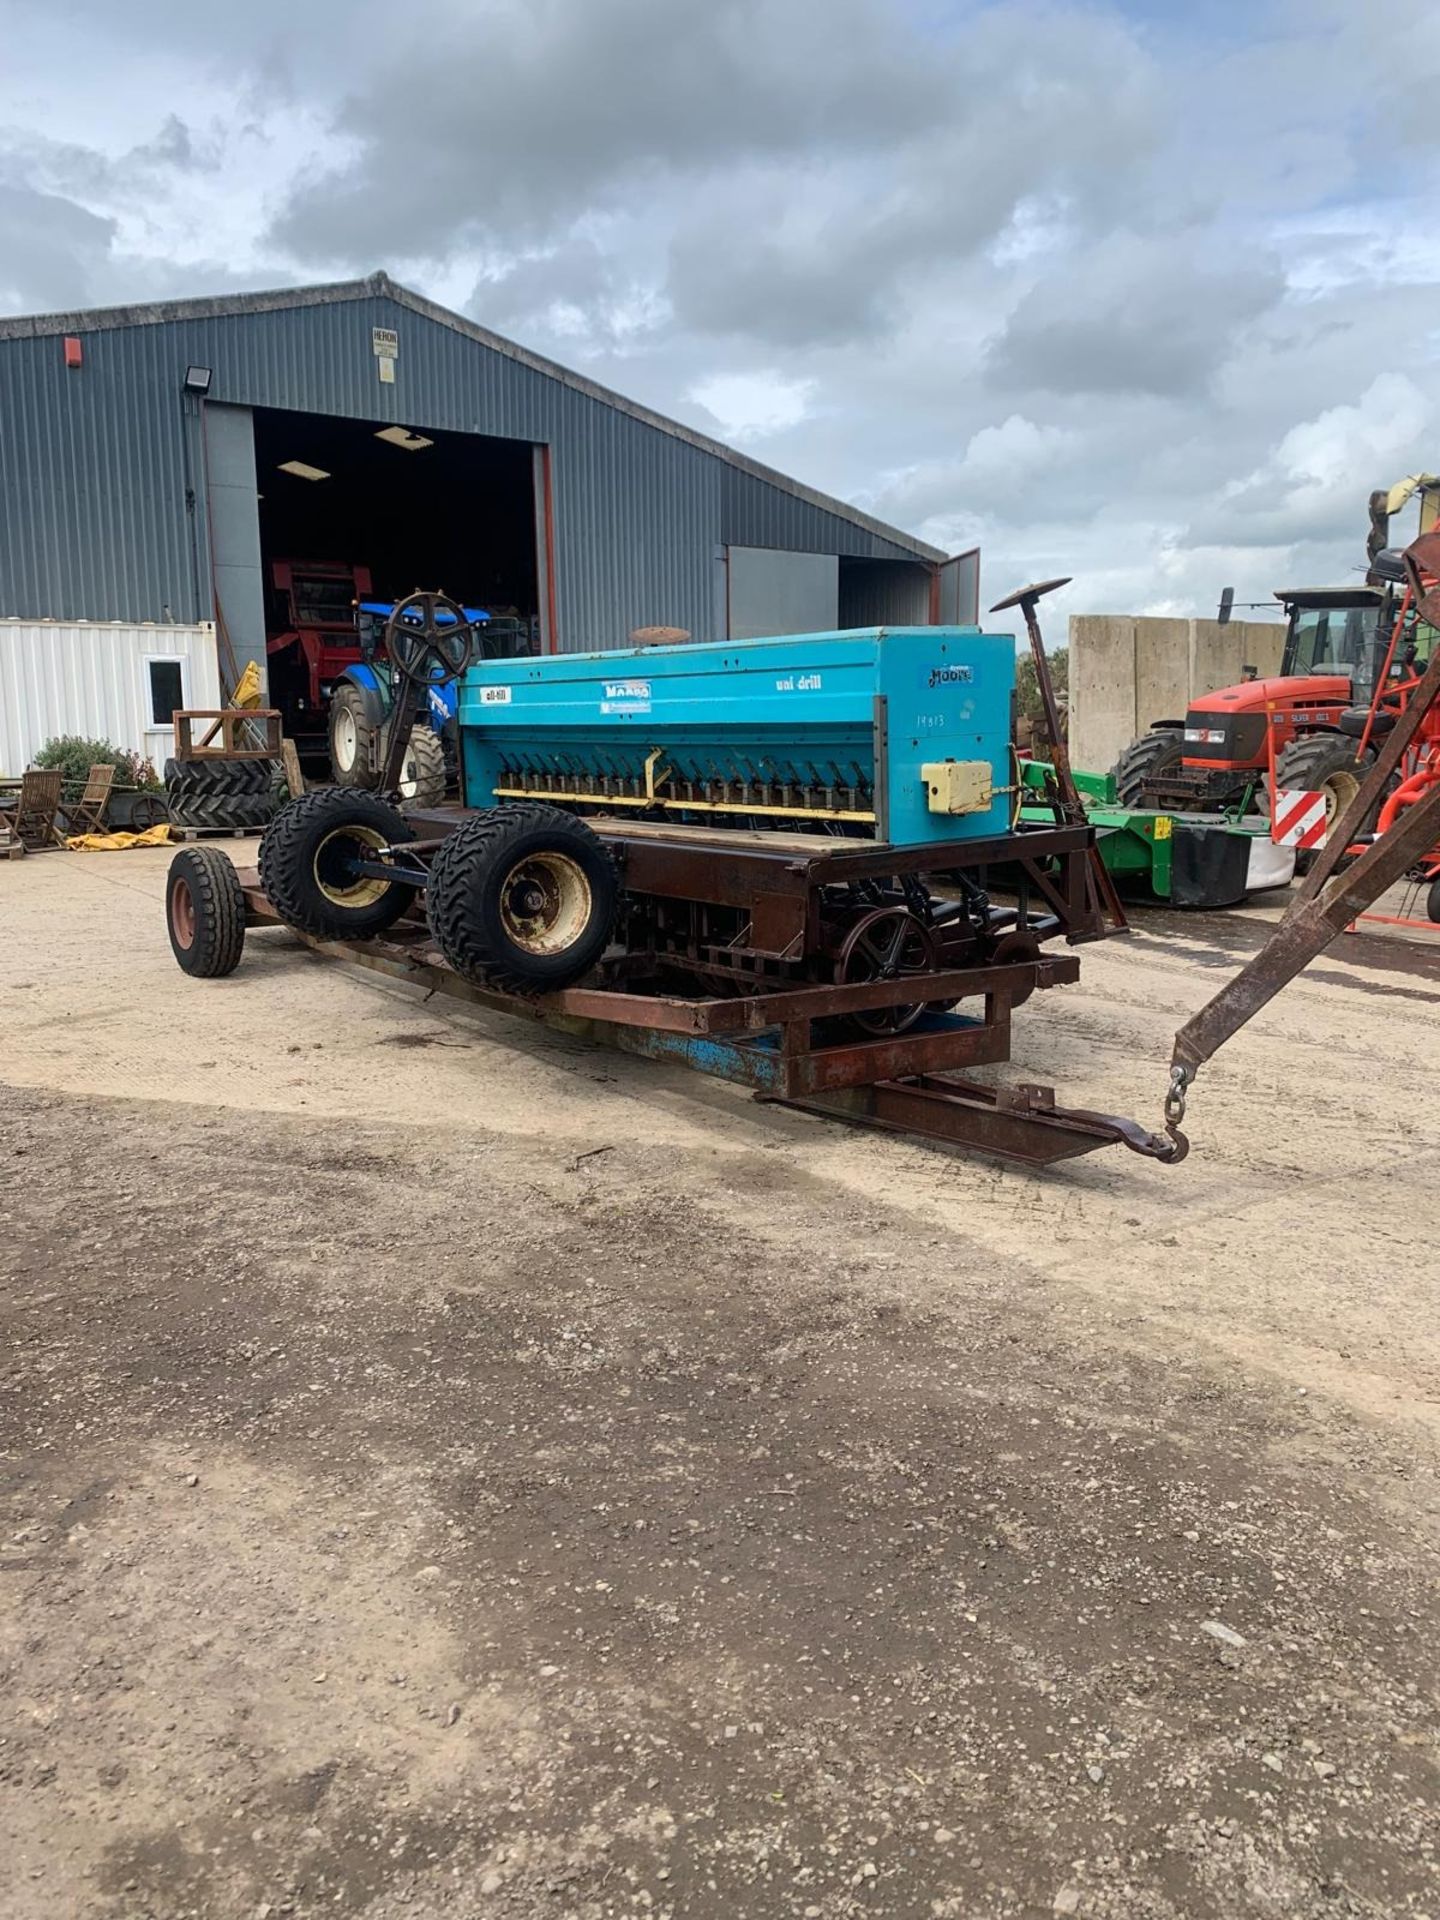 MOORE 4M UNI DRILL WITH TRAILER